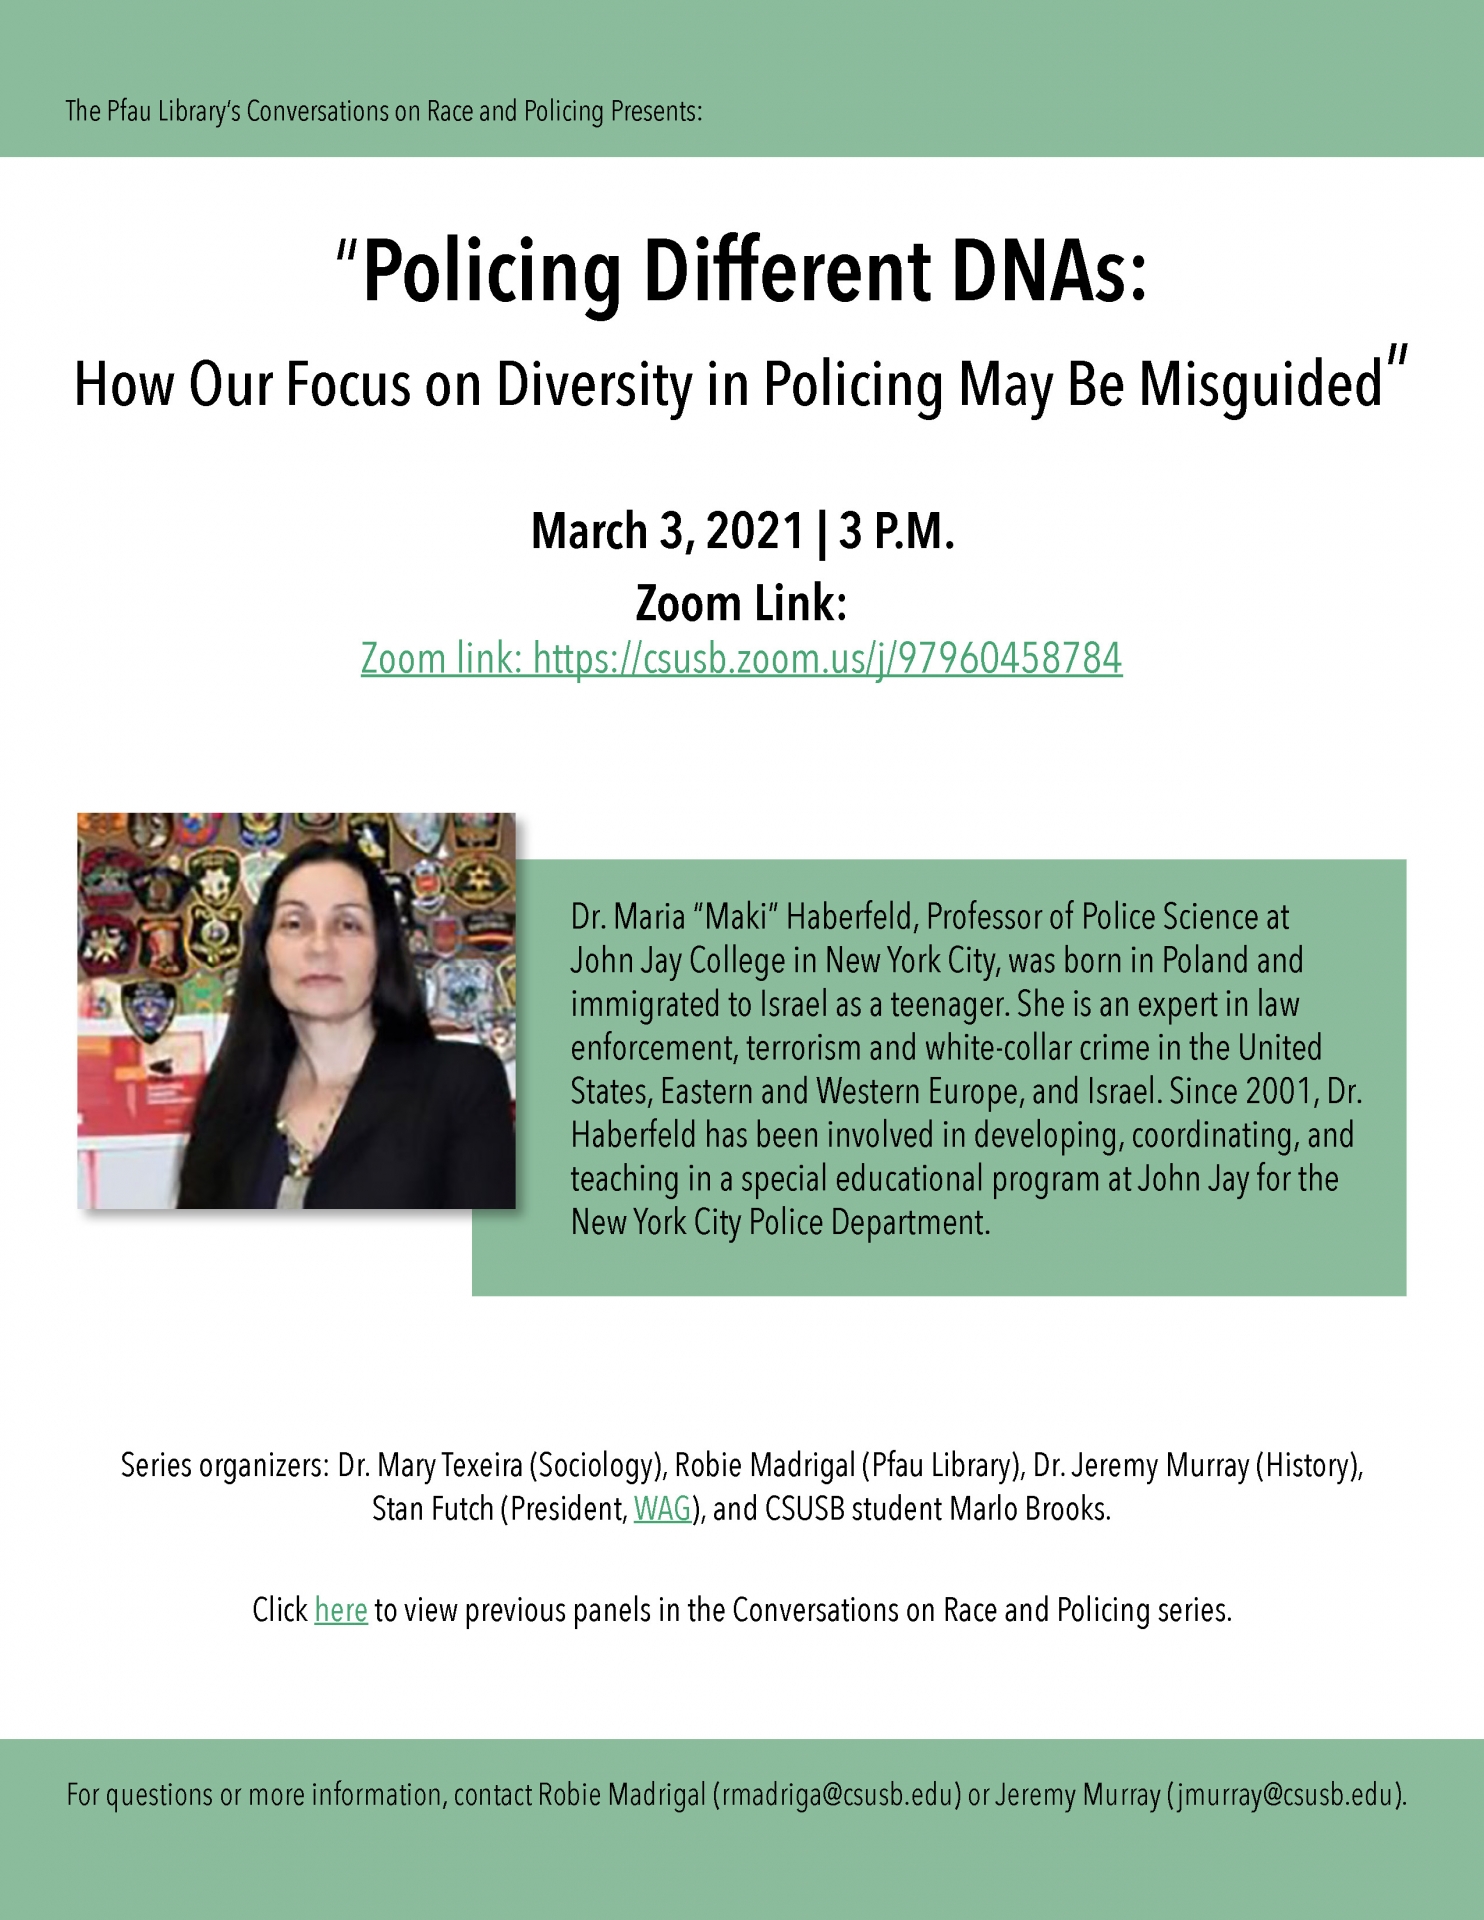 Race and Policing presentation flyer, March 2, 2021